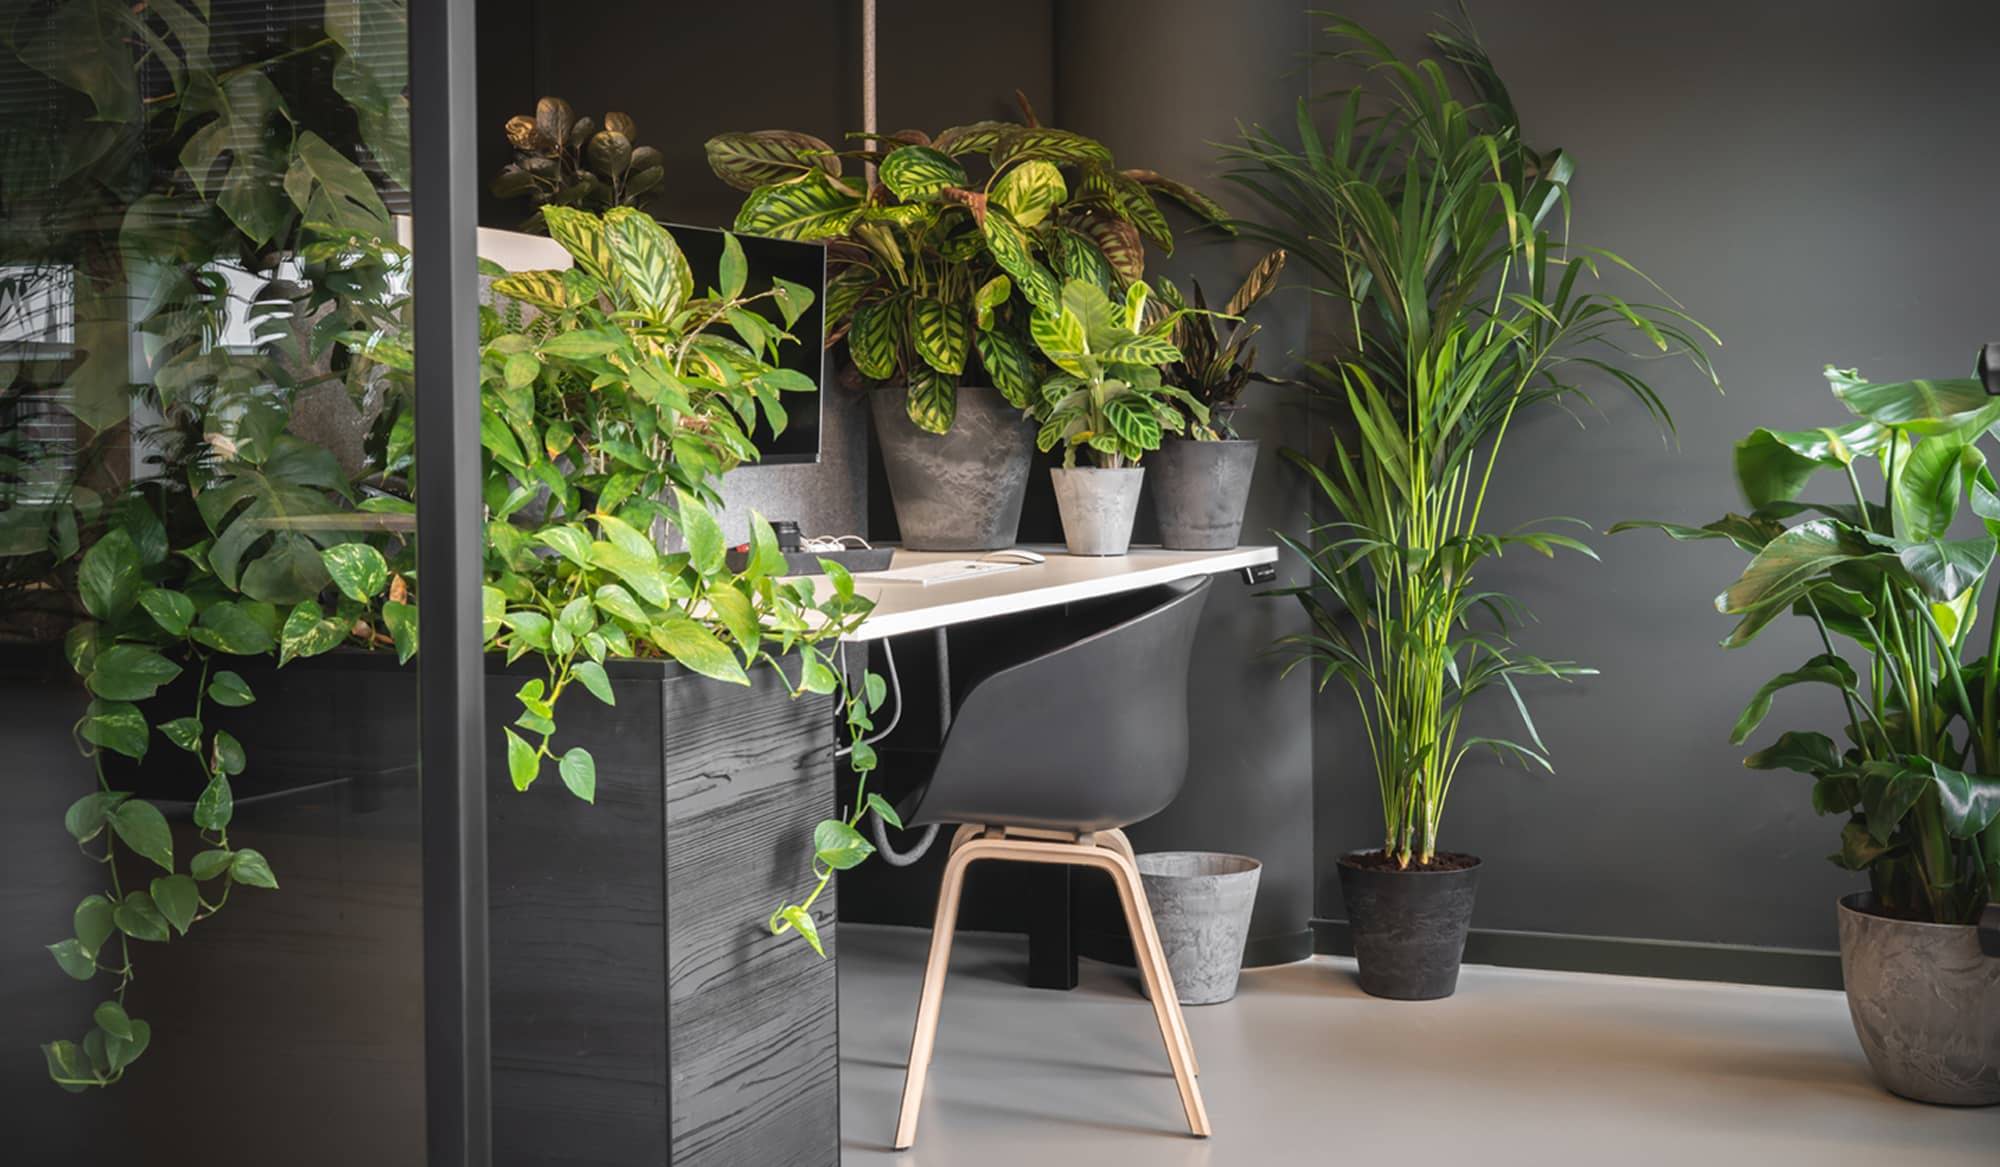 Modern computer desk area with plants in various sizes and colors of Artstone self-watering planters.